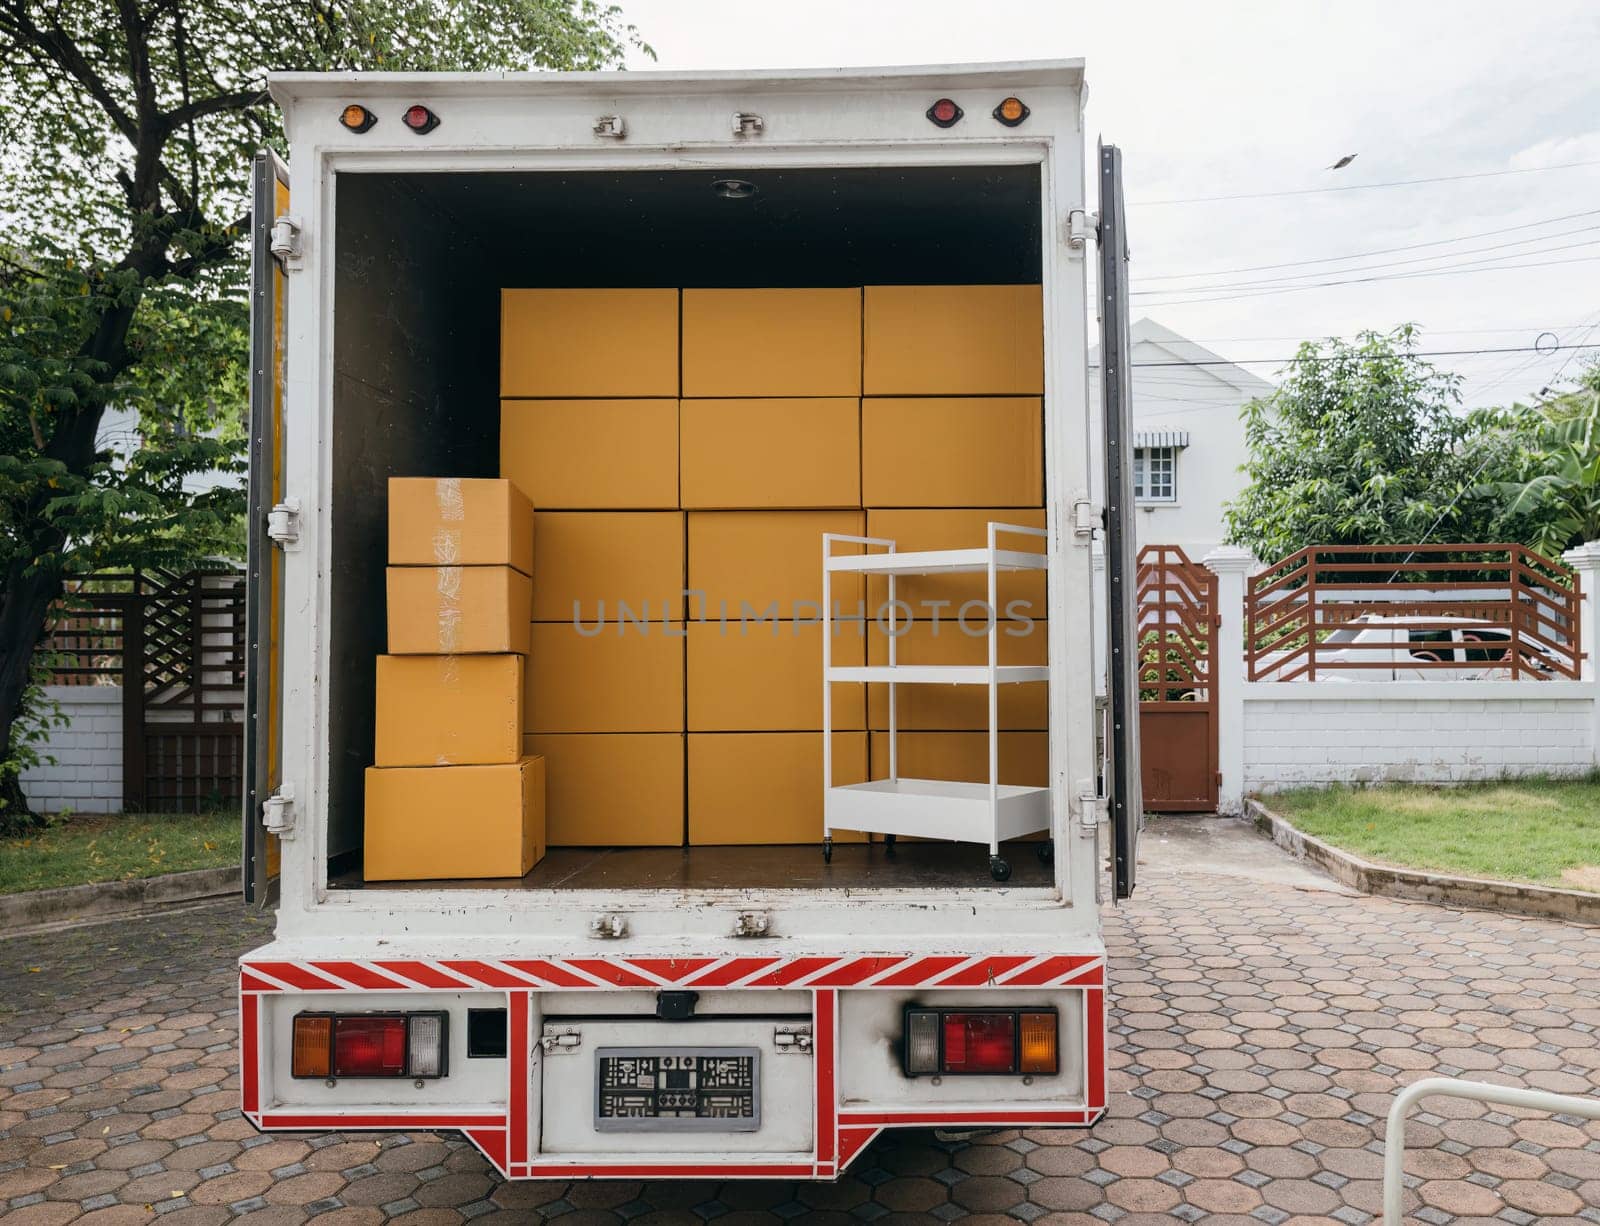 Logistic service outdoors, Open car trunk carrying moving cardboard boxes. White delivery van for house relocation. Transporting items scene. Moving Day Concept.